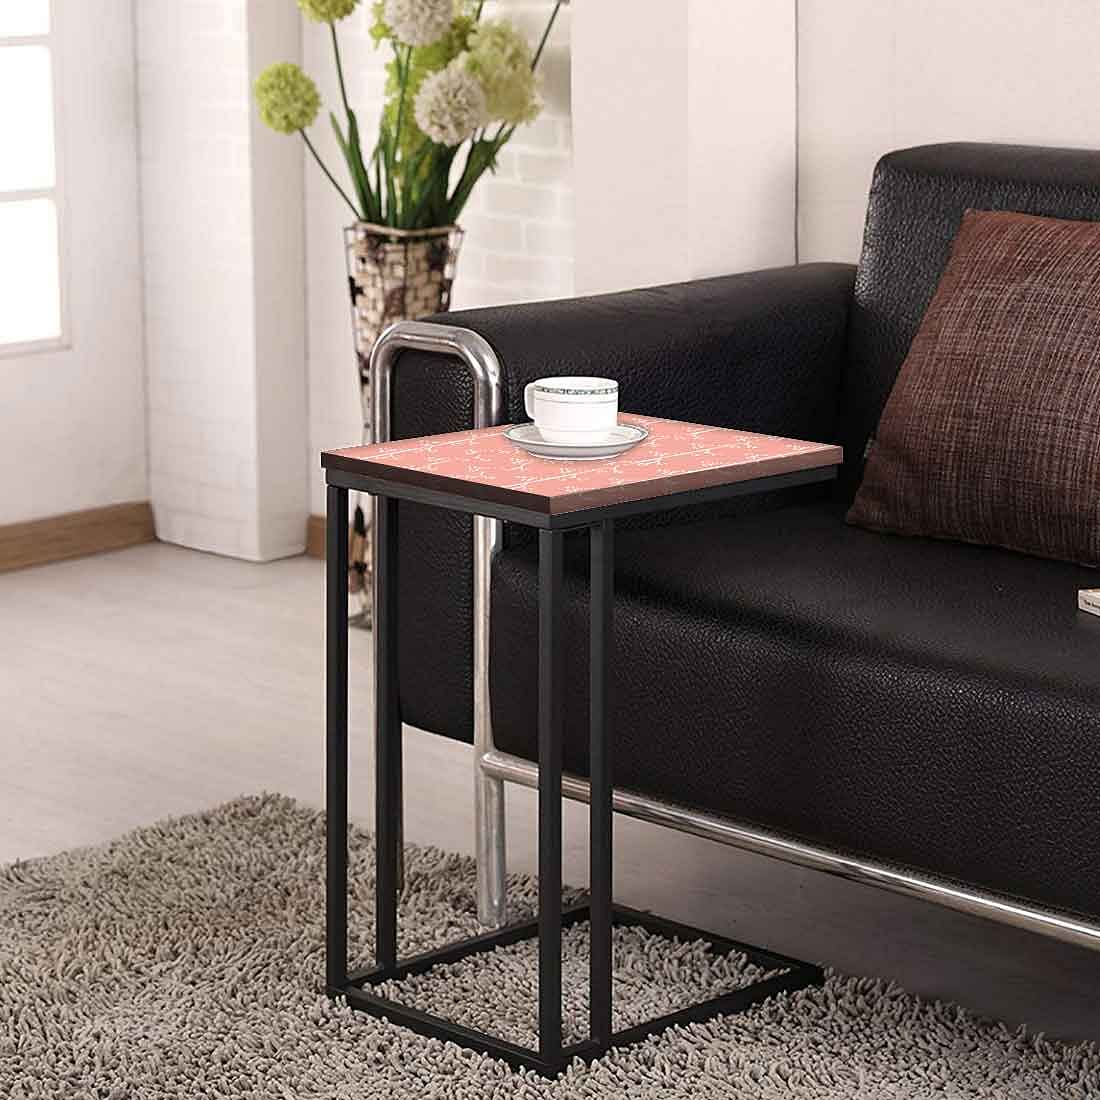 C Shaped Side Table For Sofa -  Branches Nutcase